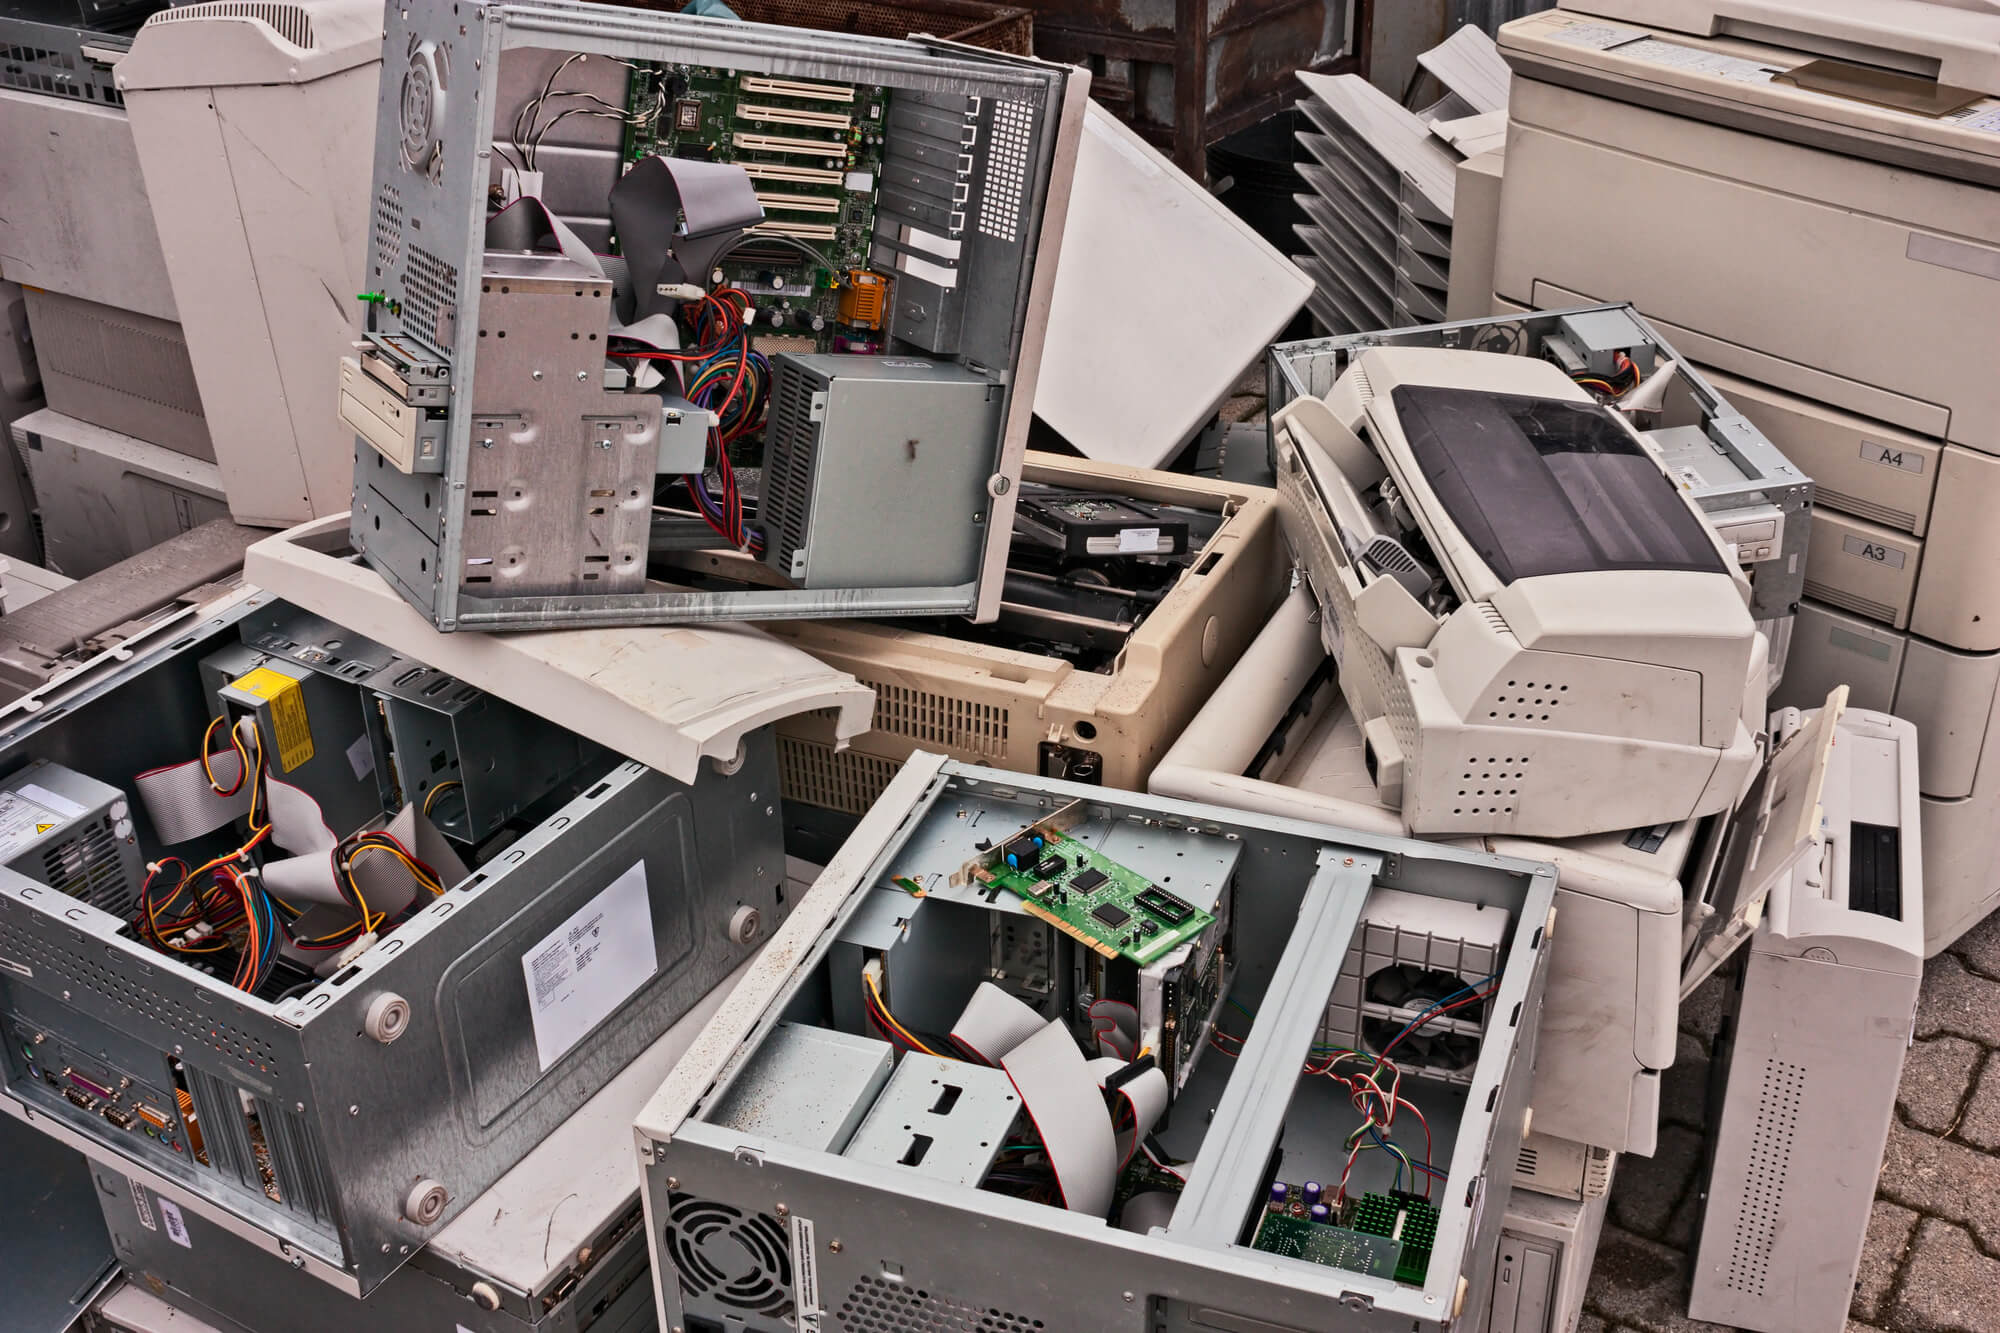 Pile of electronic equipment waste